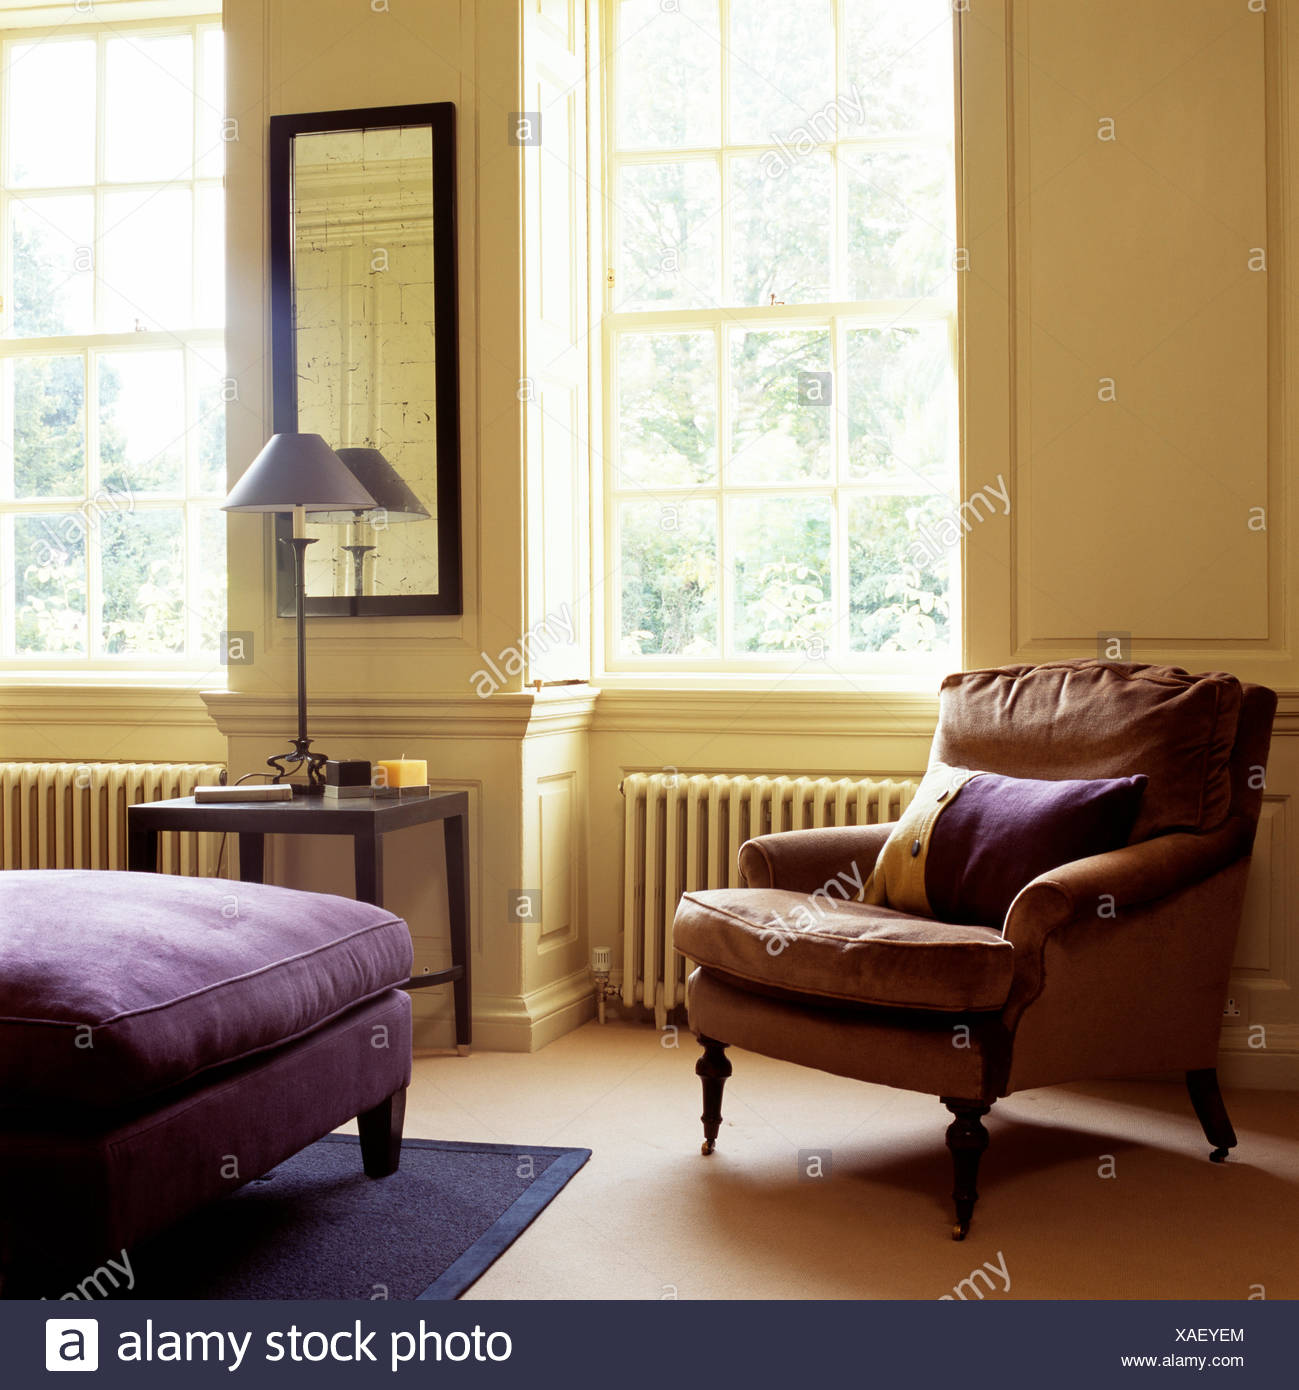 brown leather armchair in cream country bedroom with purple